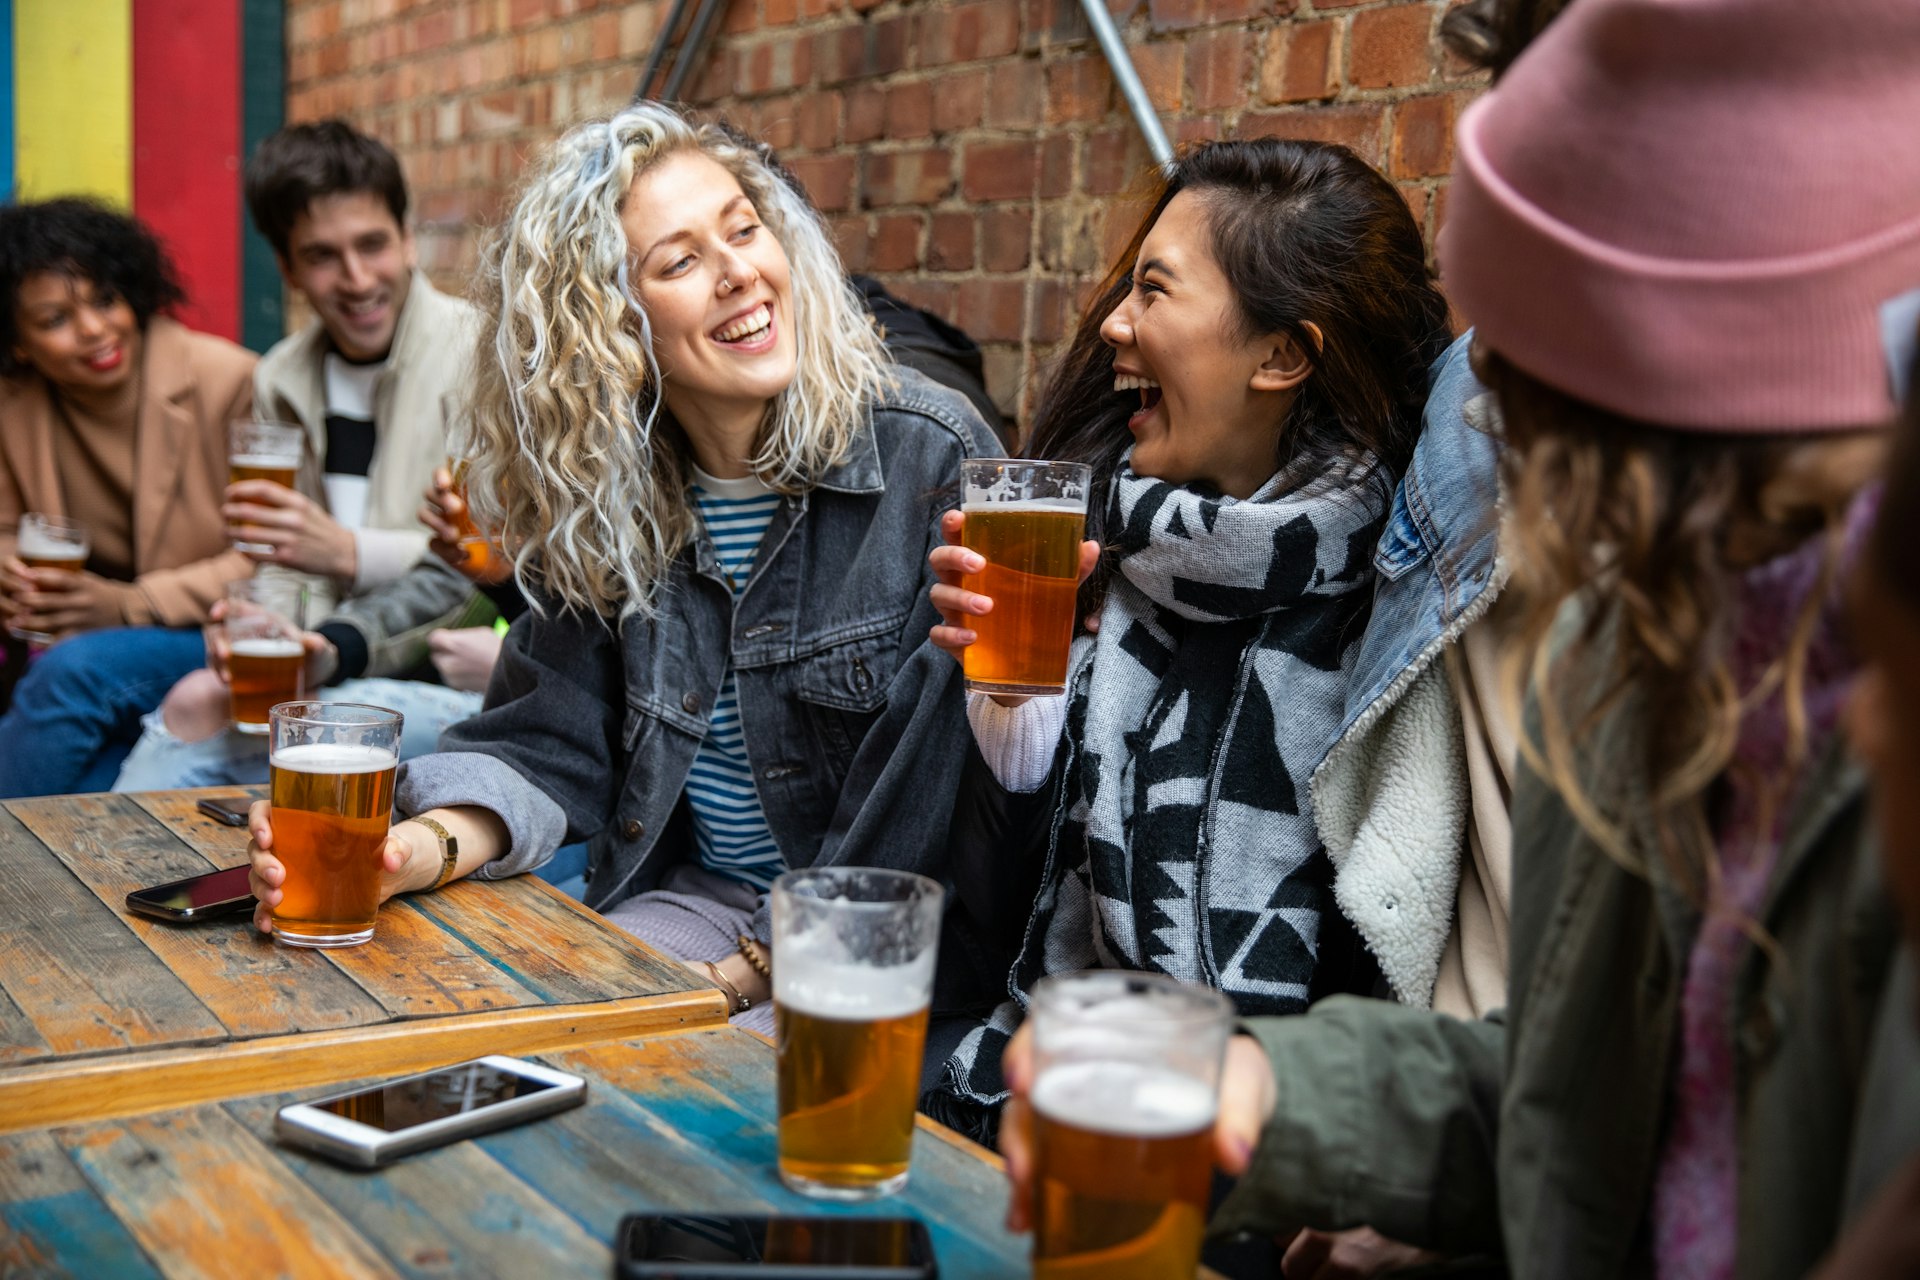 A group of friends at a pub laugh while holding pints of beer